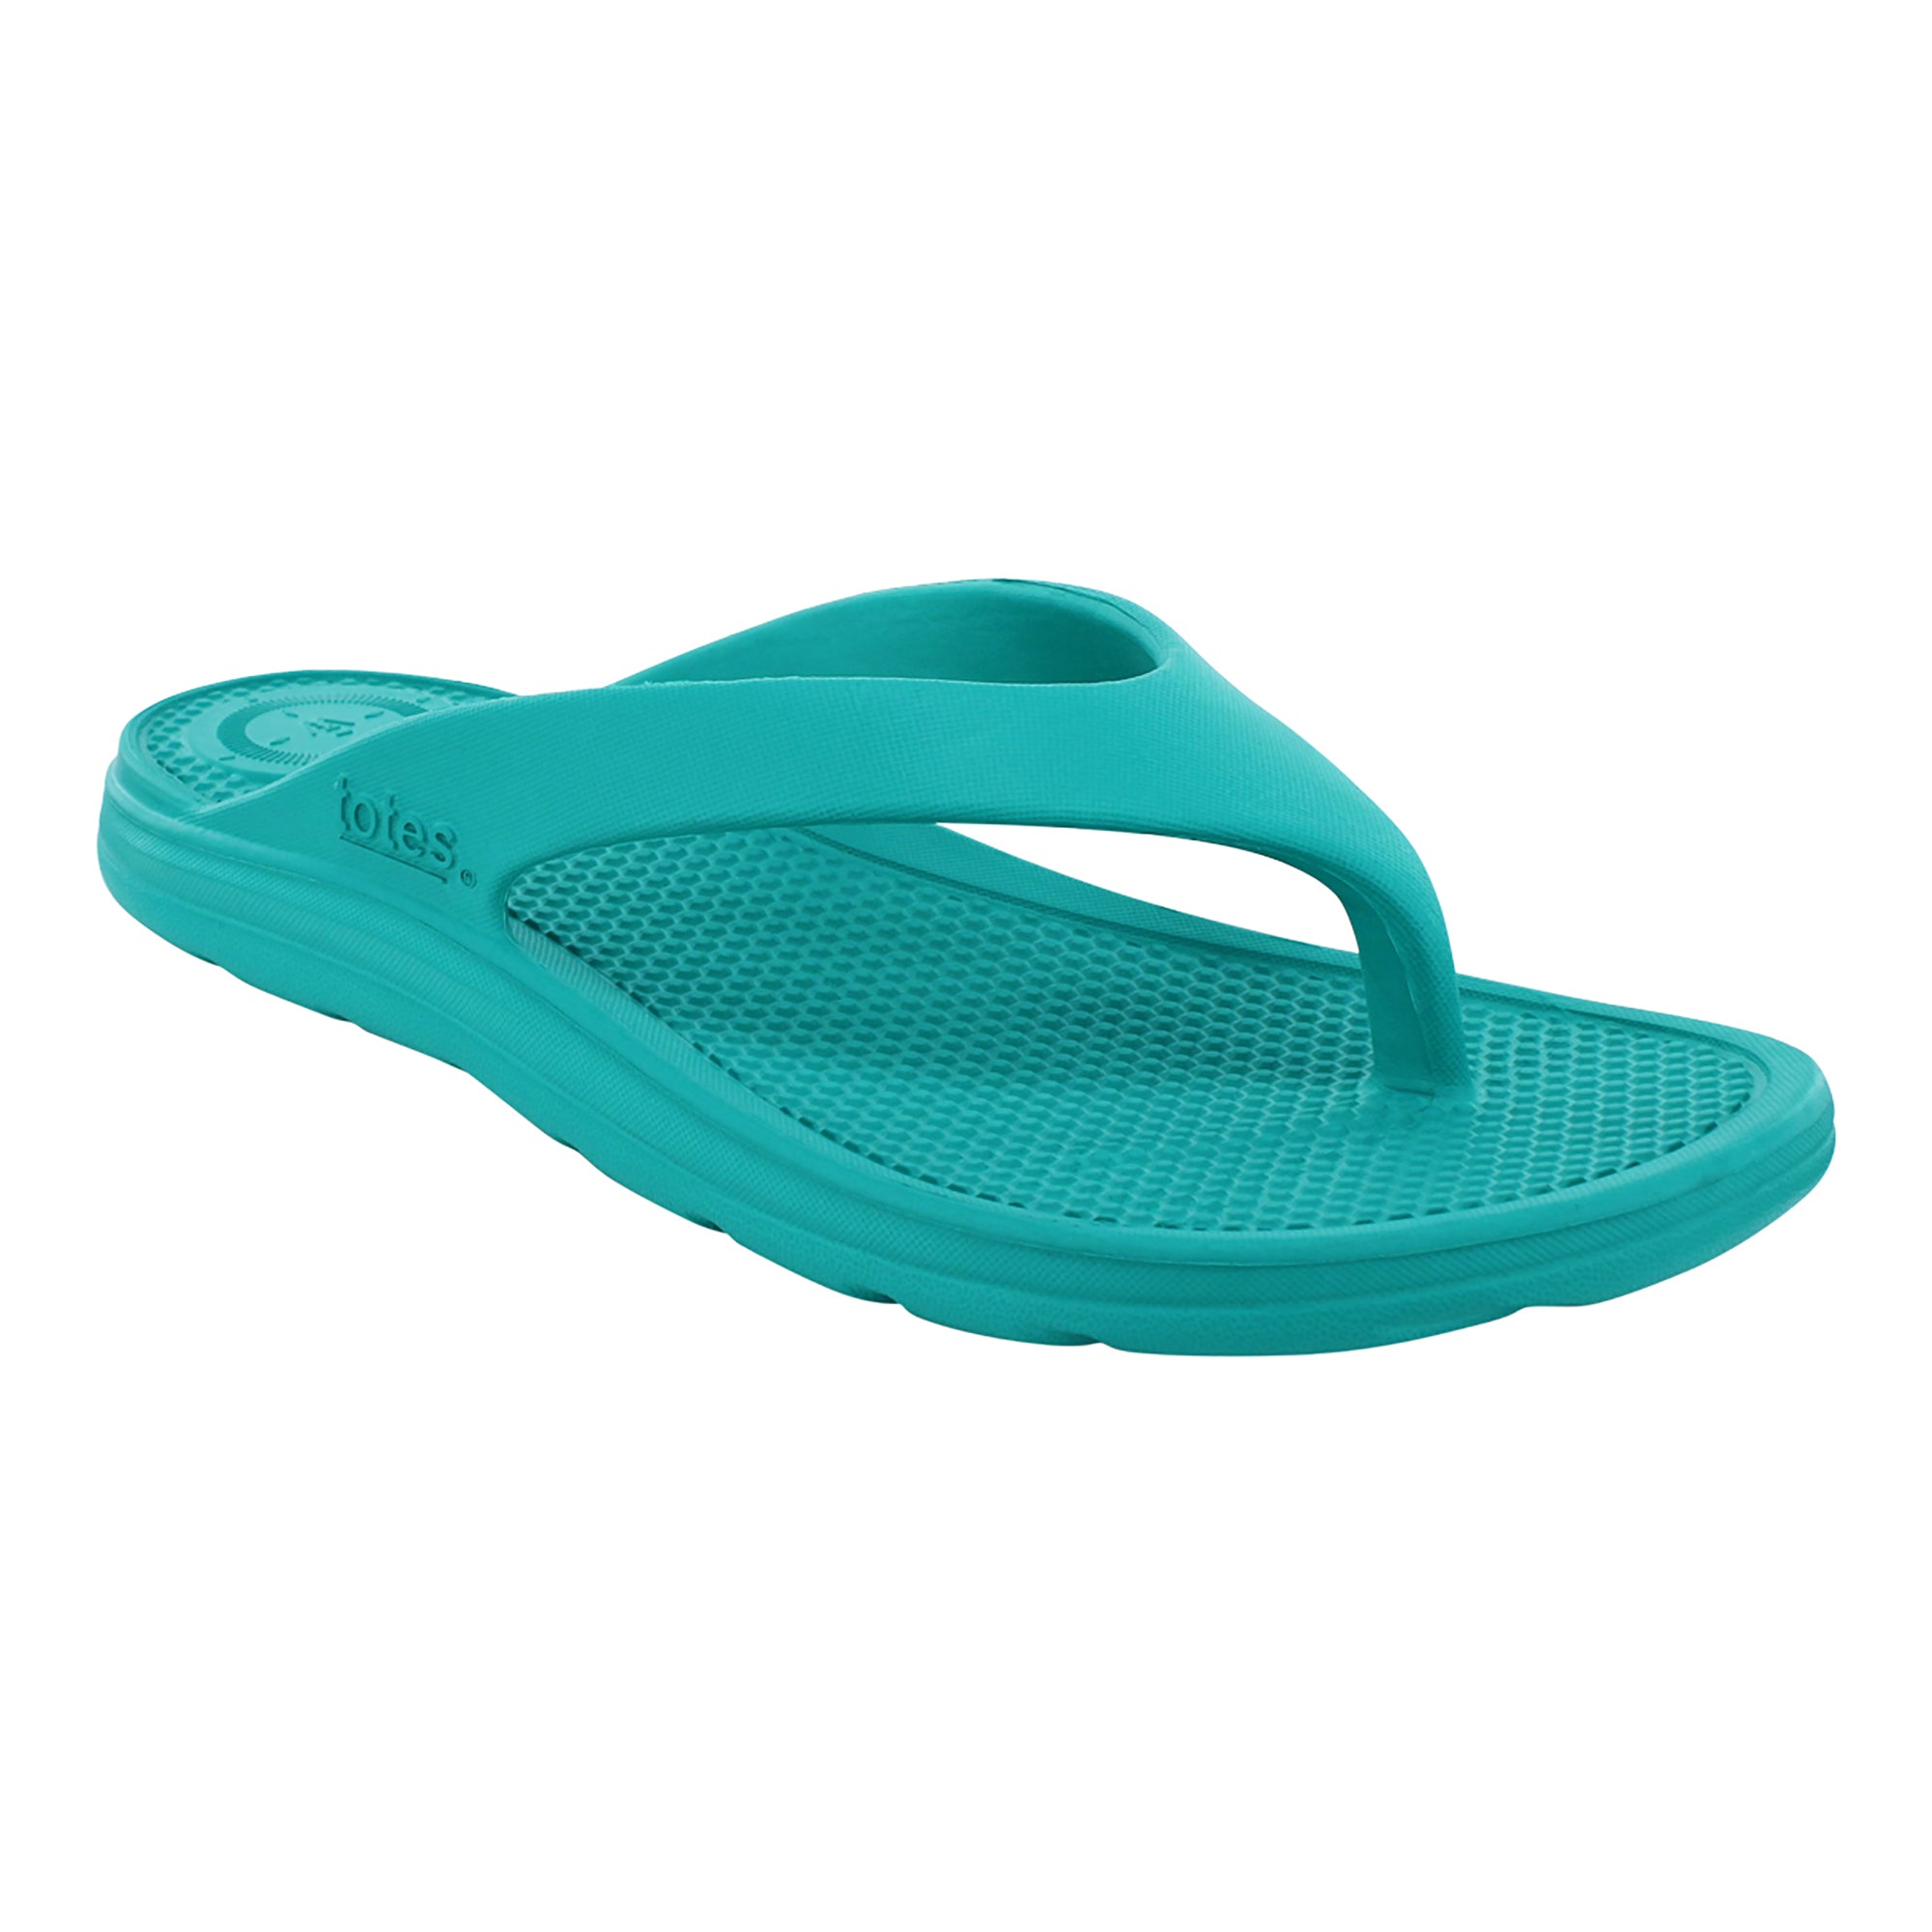 Totes® Women's Sol Bounce Ara Thong Sandals - Mineral, size 7